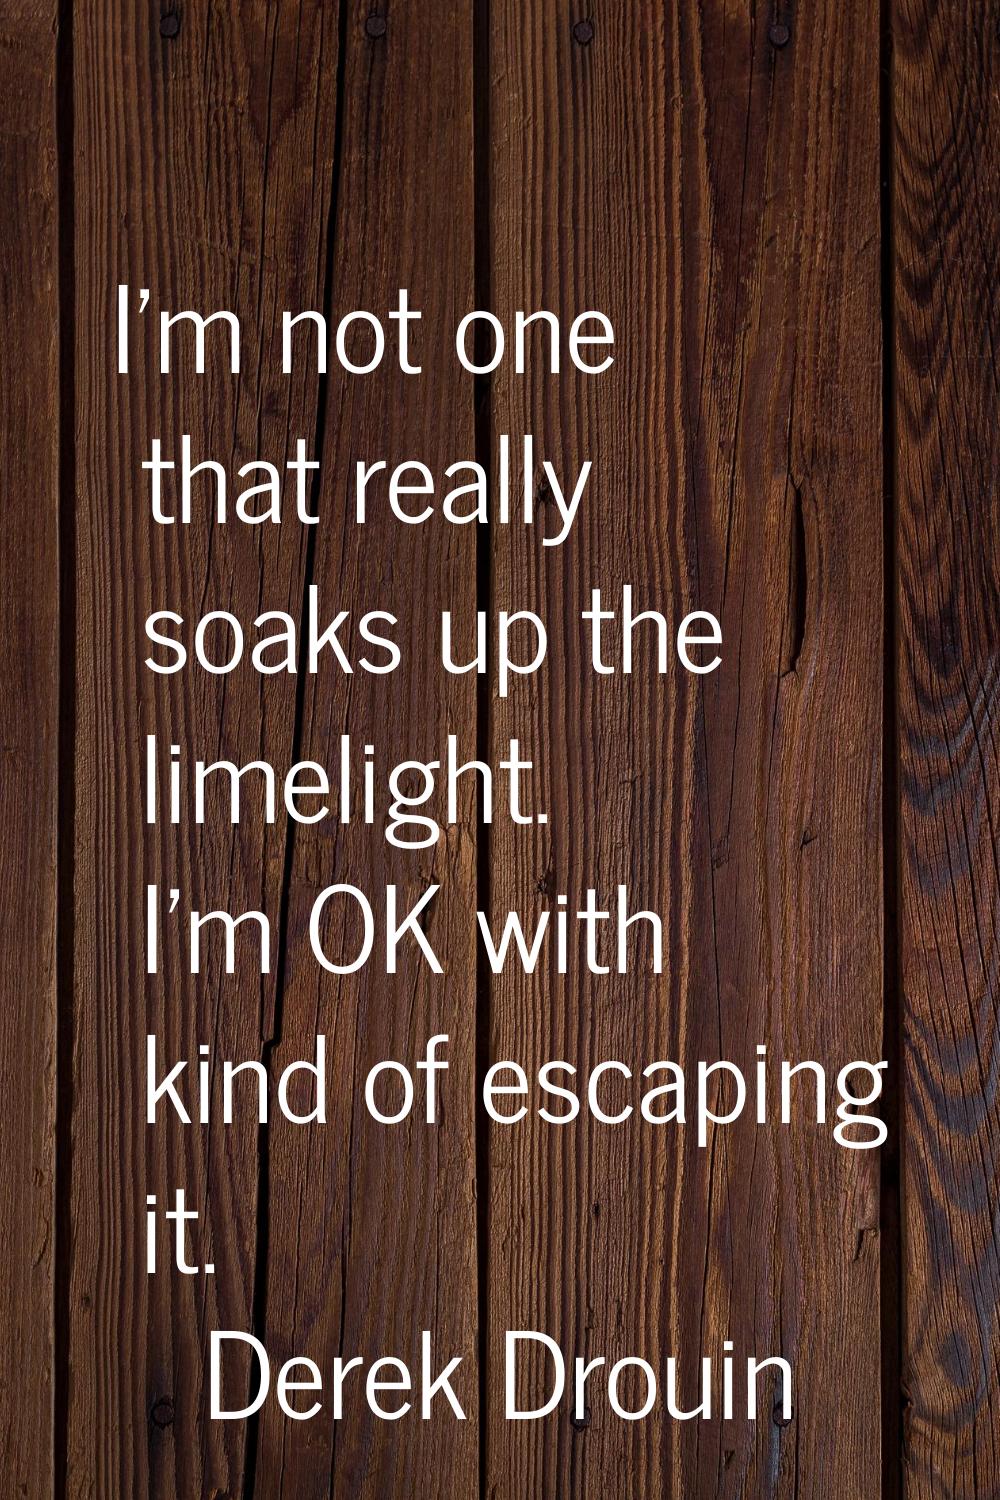 I'm not one that really soaks up the limelight. I'm OK with kind of escaping it.